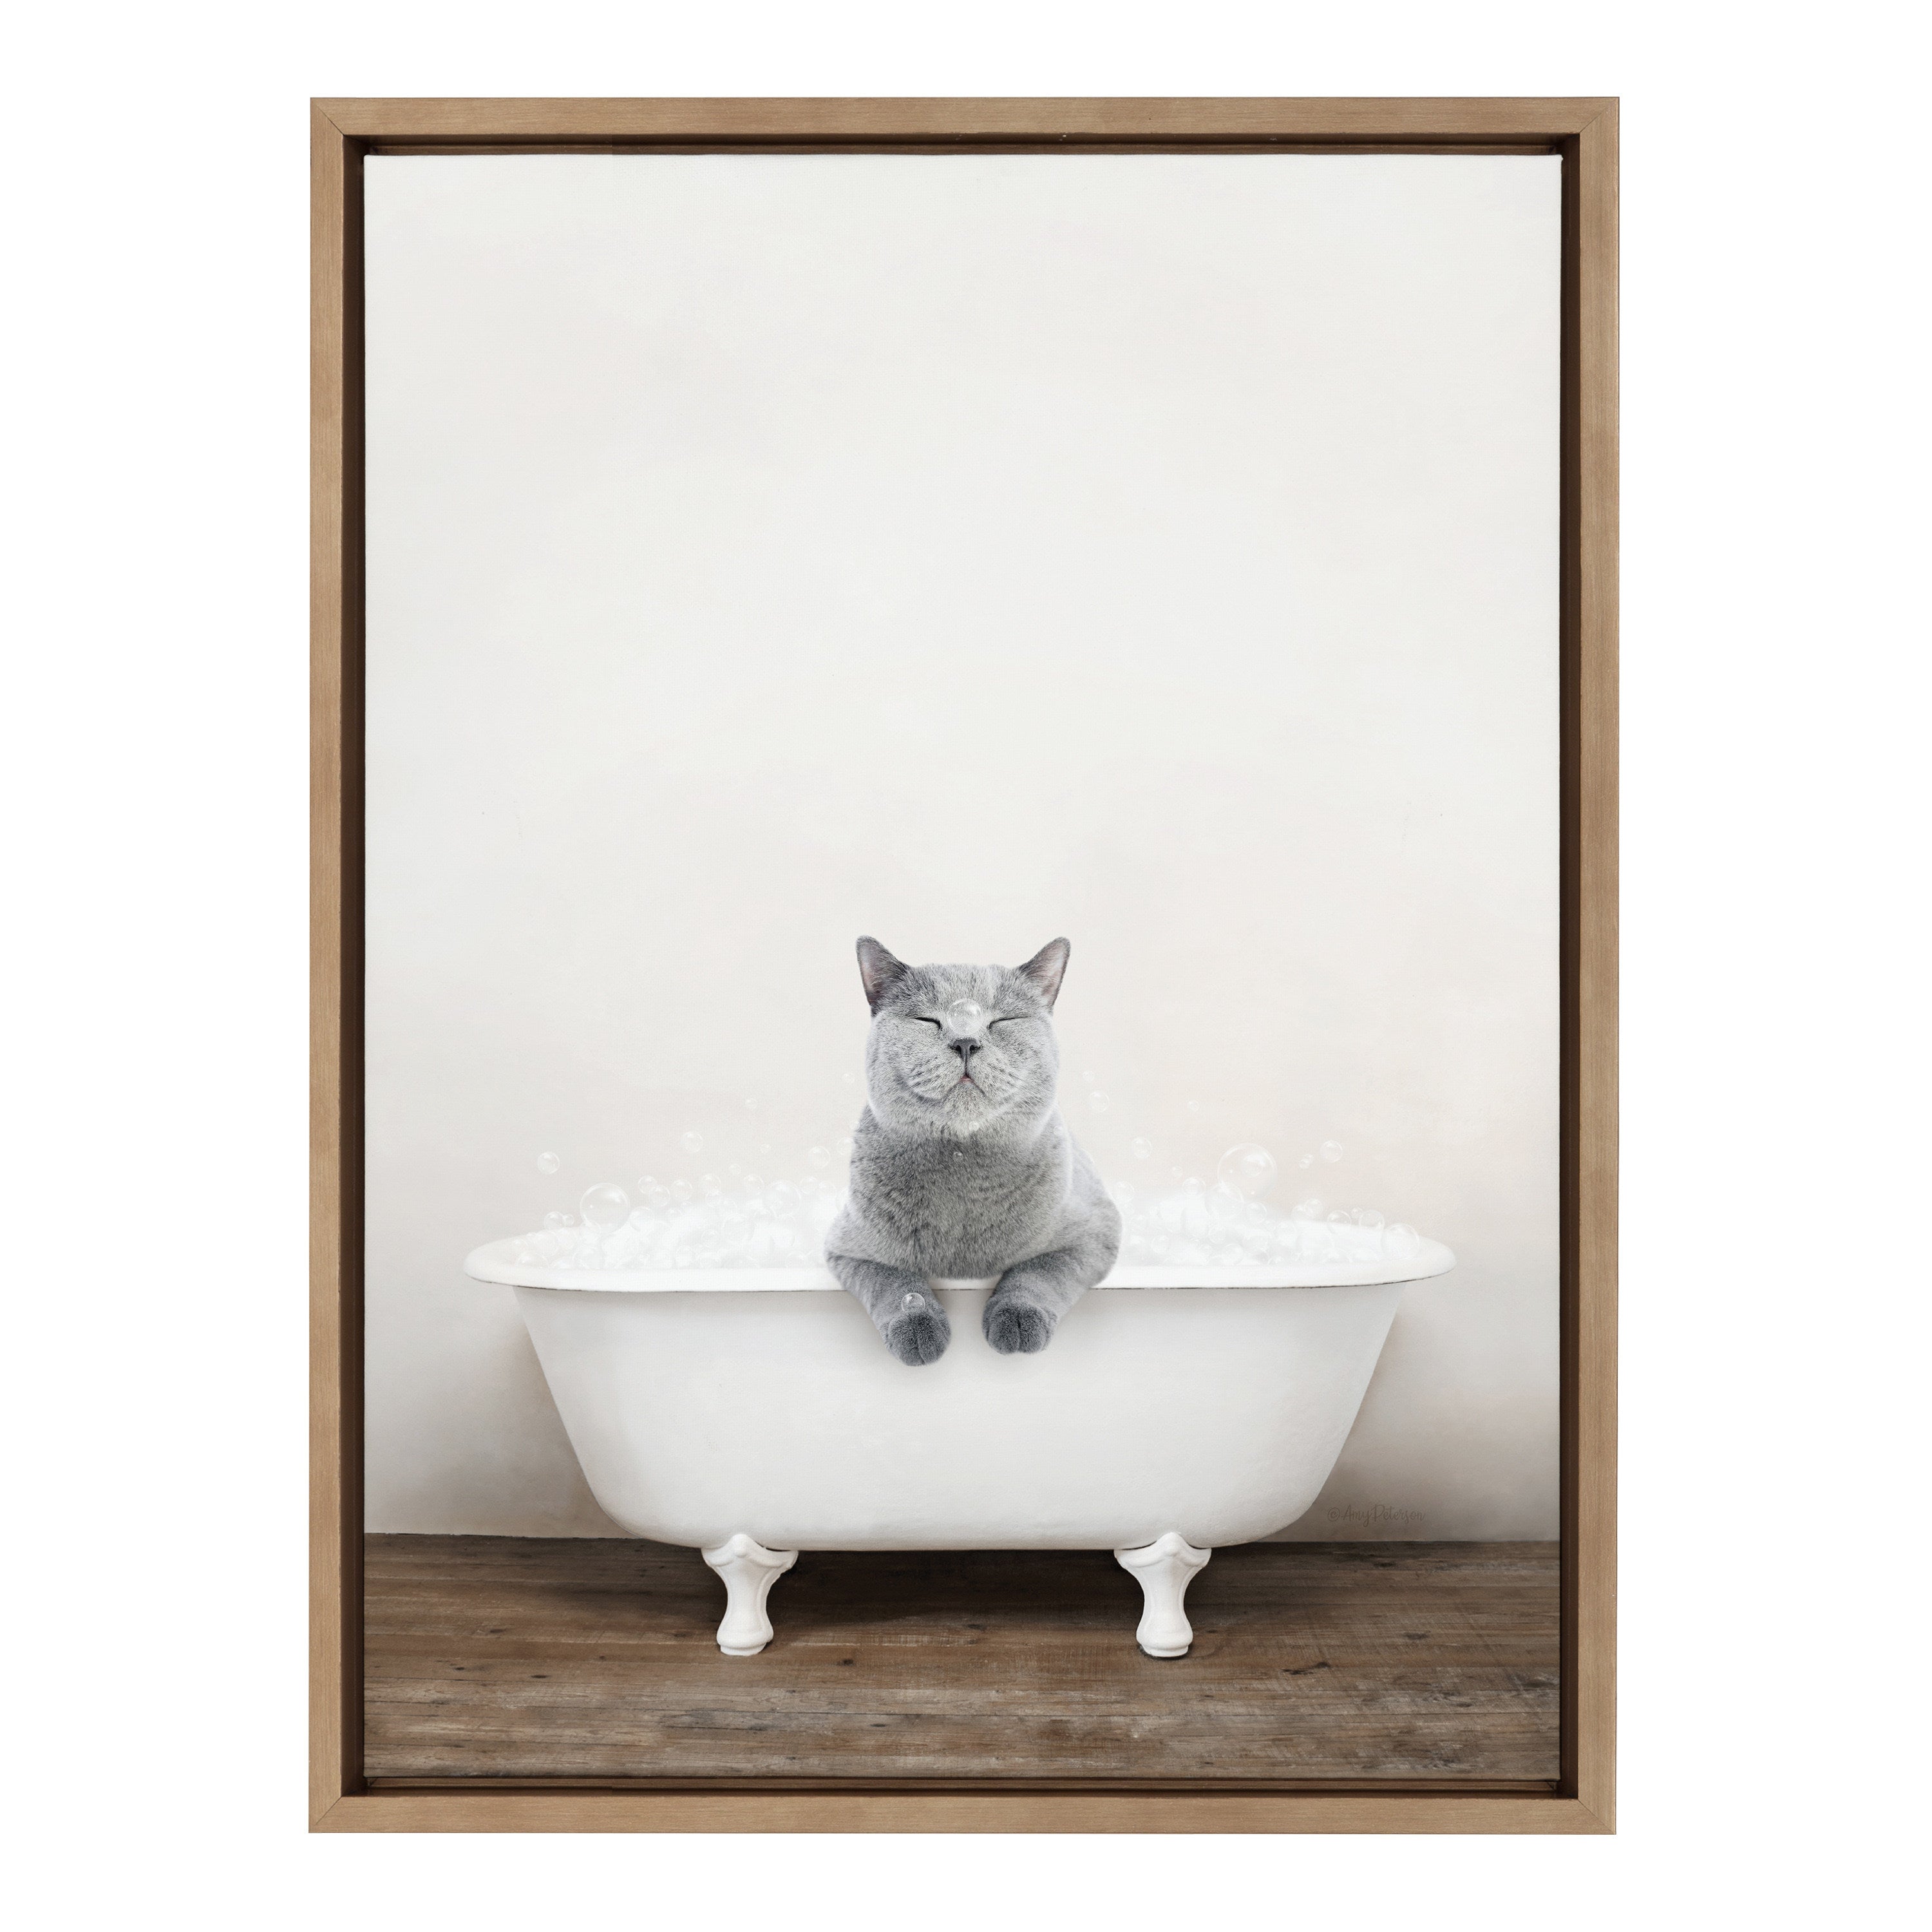 Sylvie Cat in Rustic Bath Framed Canvas by Amy Peterson Art Studio